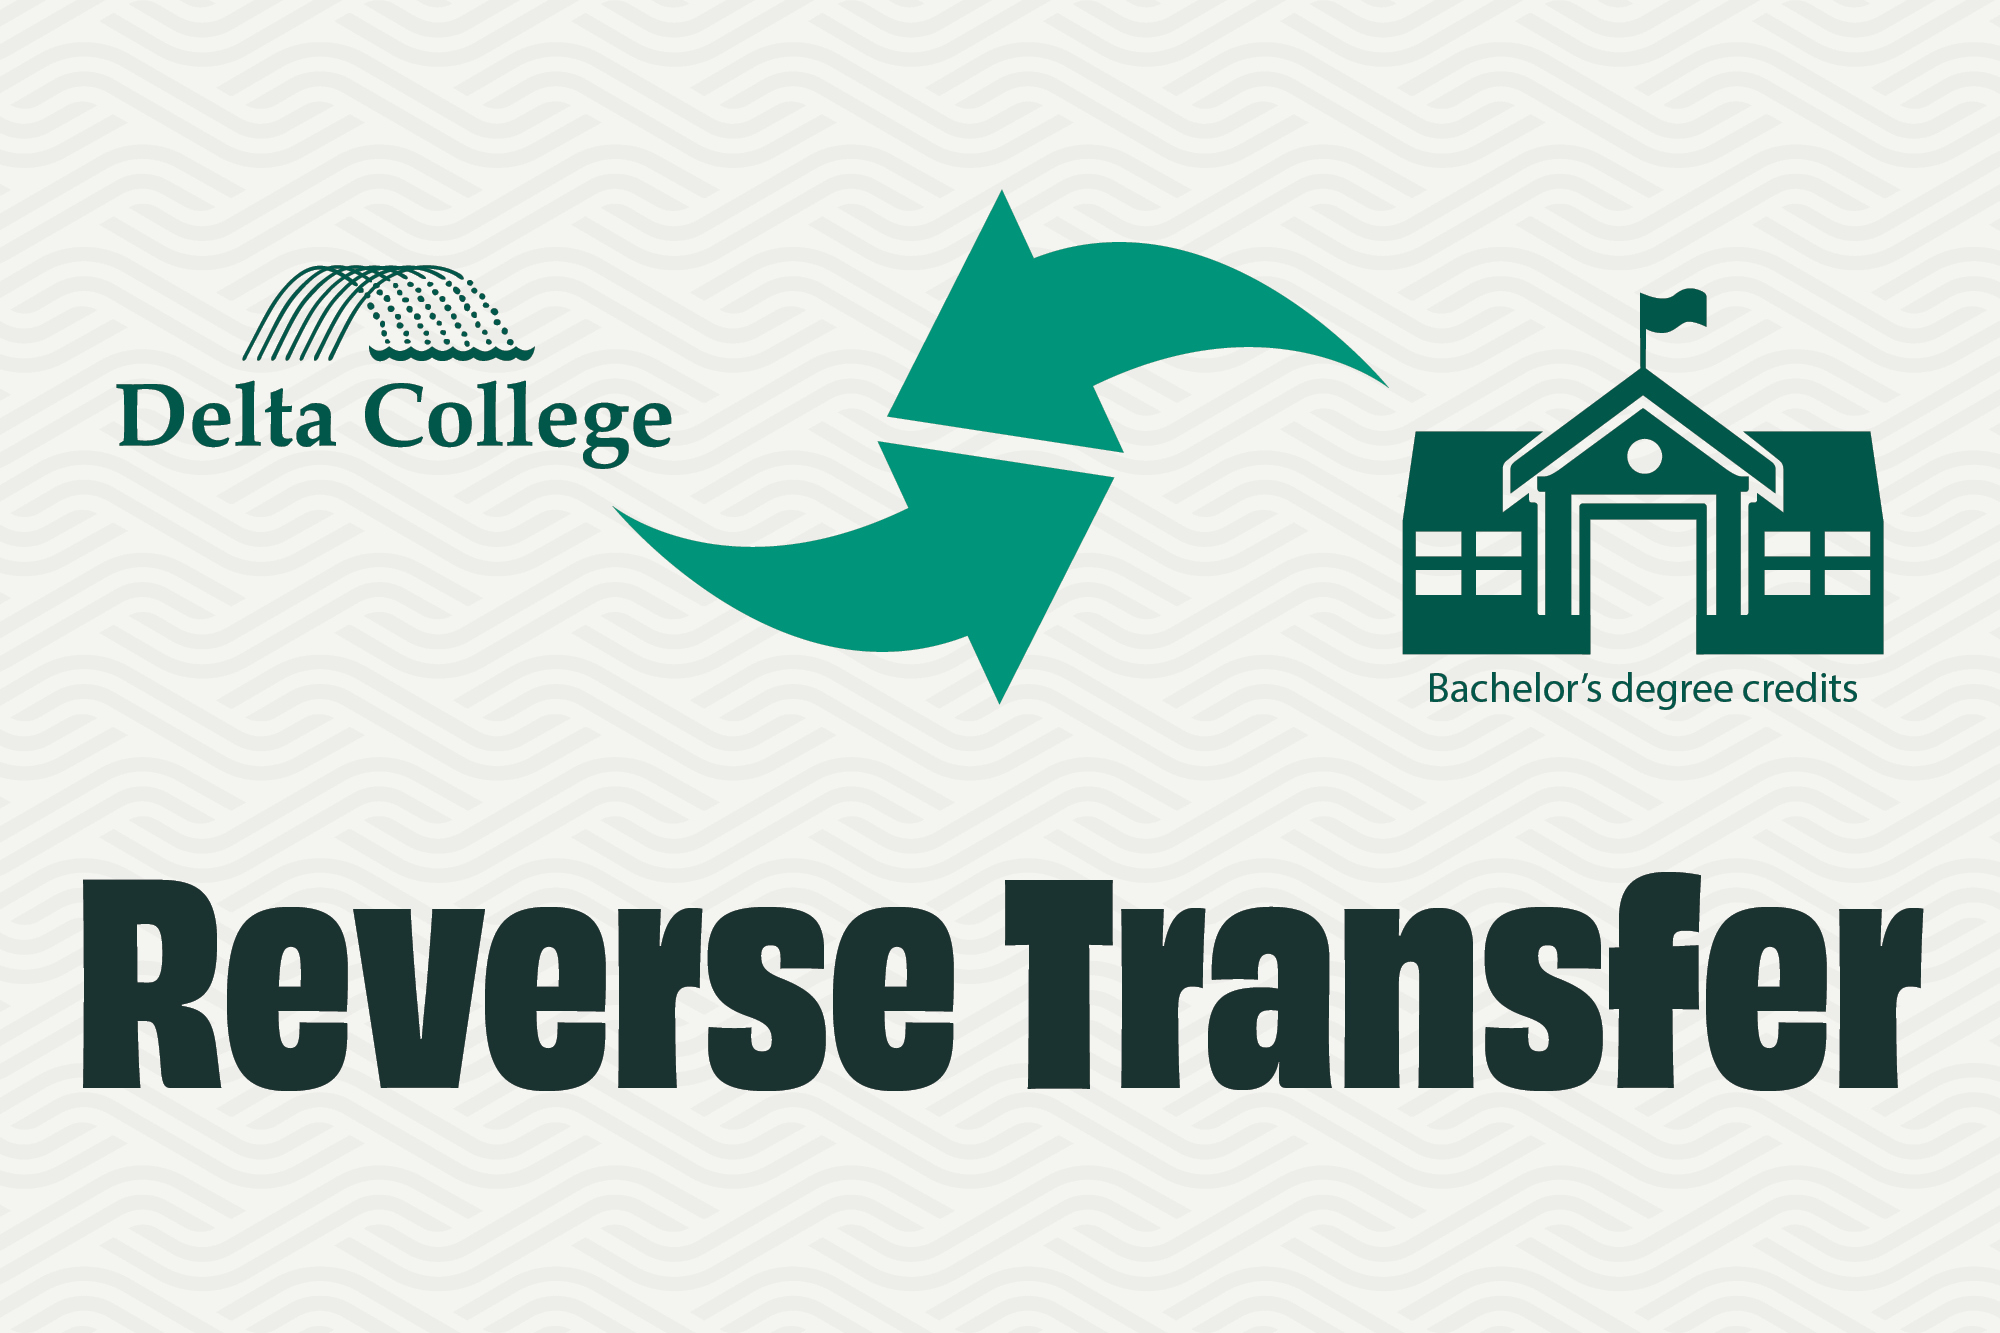 Reverse transfer your credits from your bachelor's degree program back to Delta College to earn your associate's degree